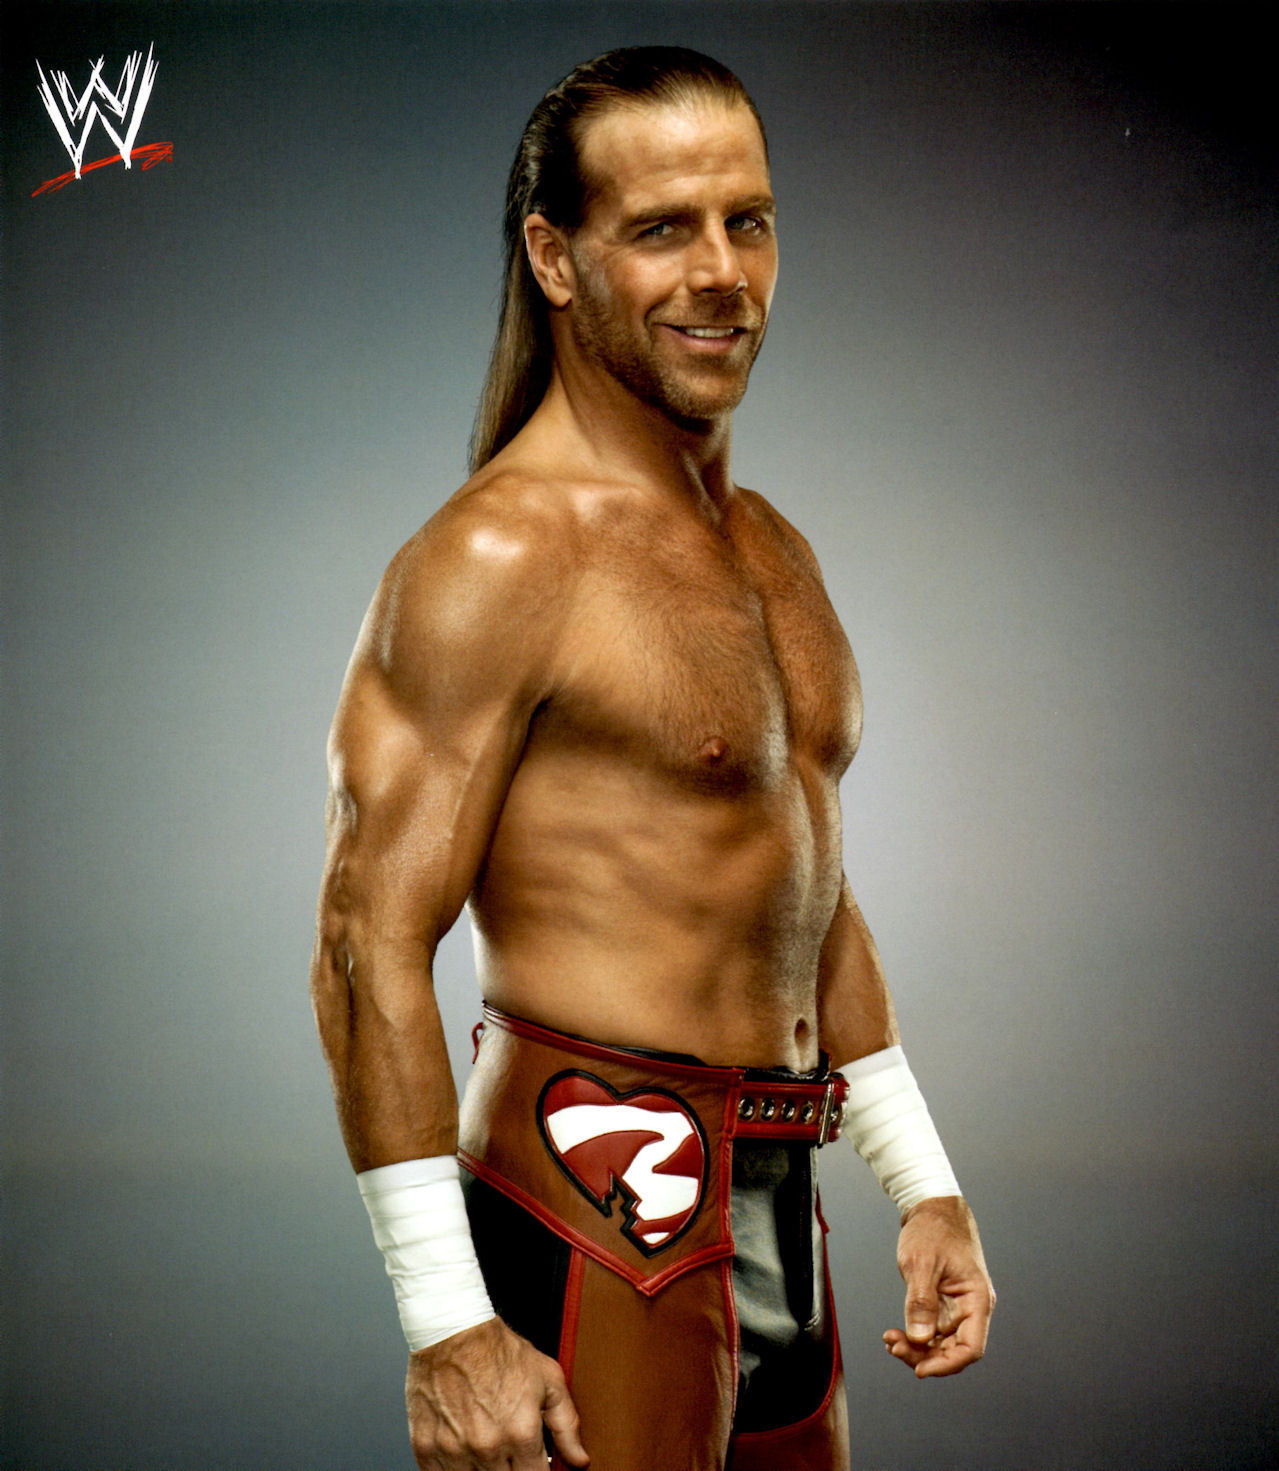 Wwe Image Shawn Michaels HD Wallpaper And Background Photos